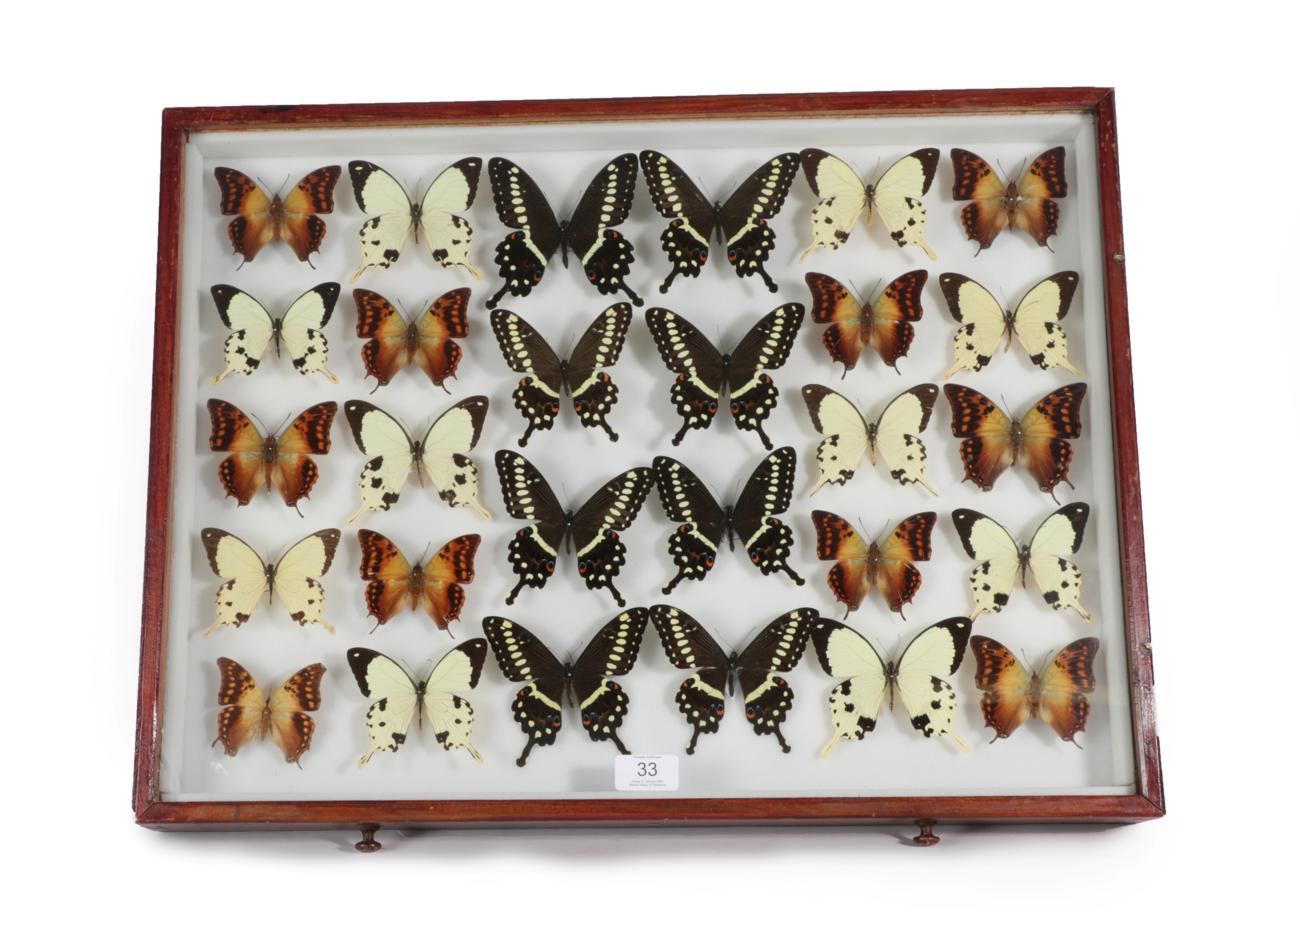 Lot 33 - Entomology: A Large Glazed of Display of African Butterflies, circa 21st century, containing...